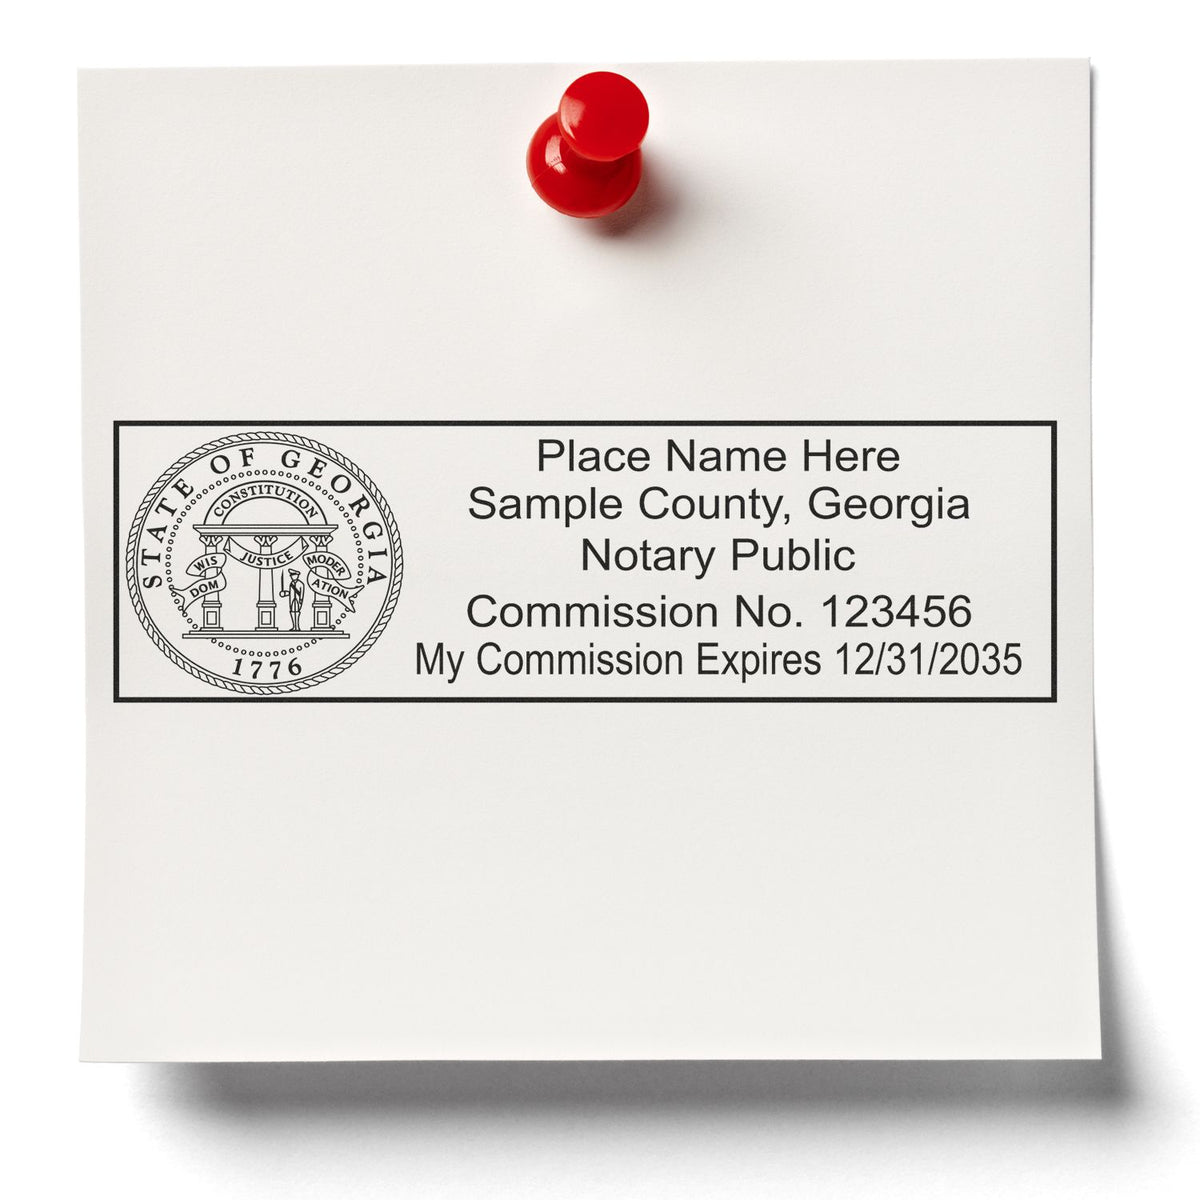 PSI Georgia Notary Stamp in use photo showing a stamped imprint of the PSI Georgia Notary Stamp